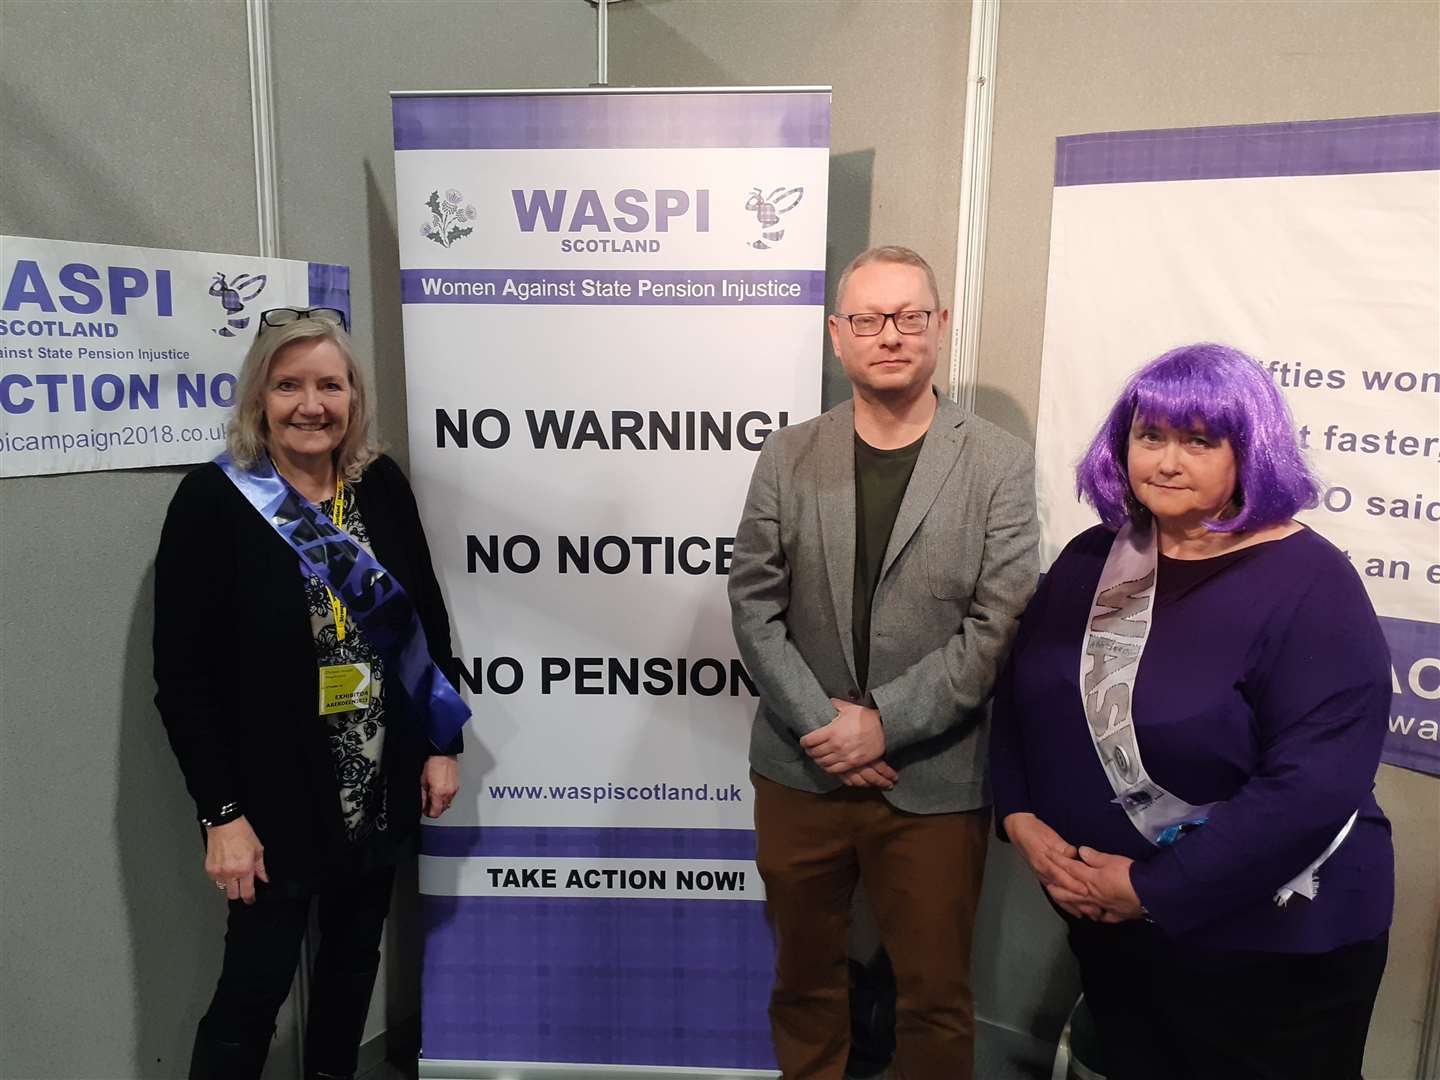 Richard Thomson MP with WASPI campaigners Christine Houston (l) and Anne Andrew (r).